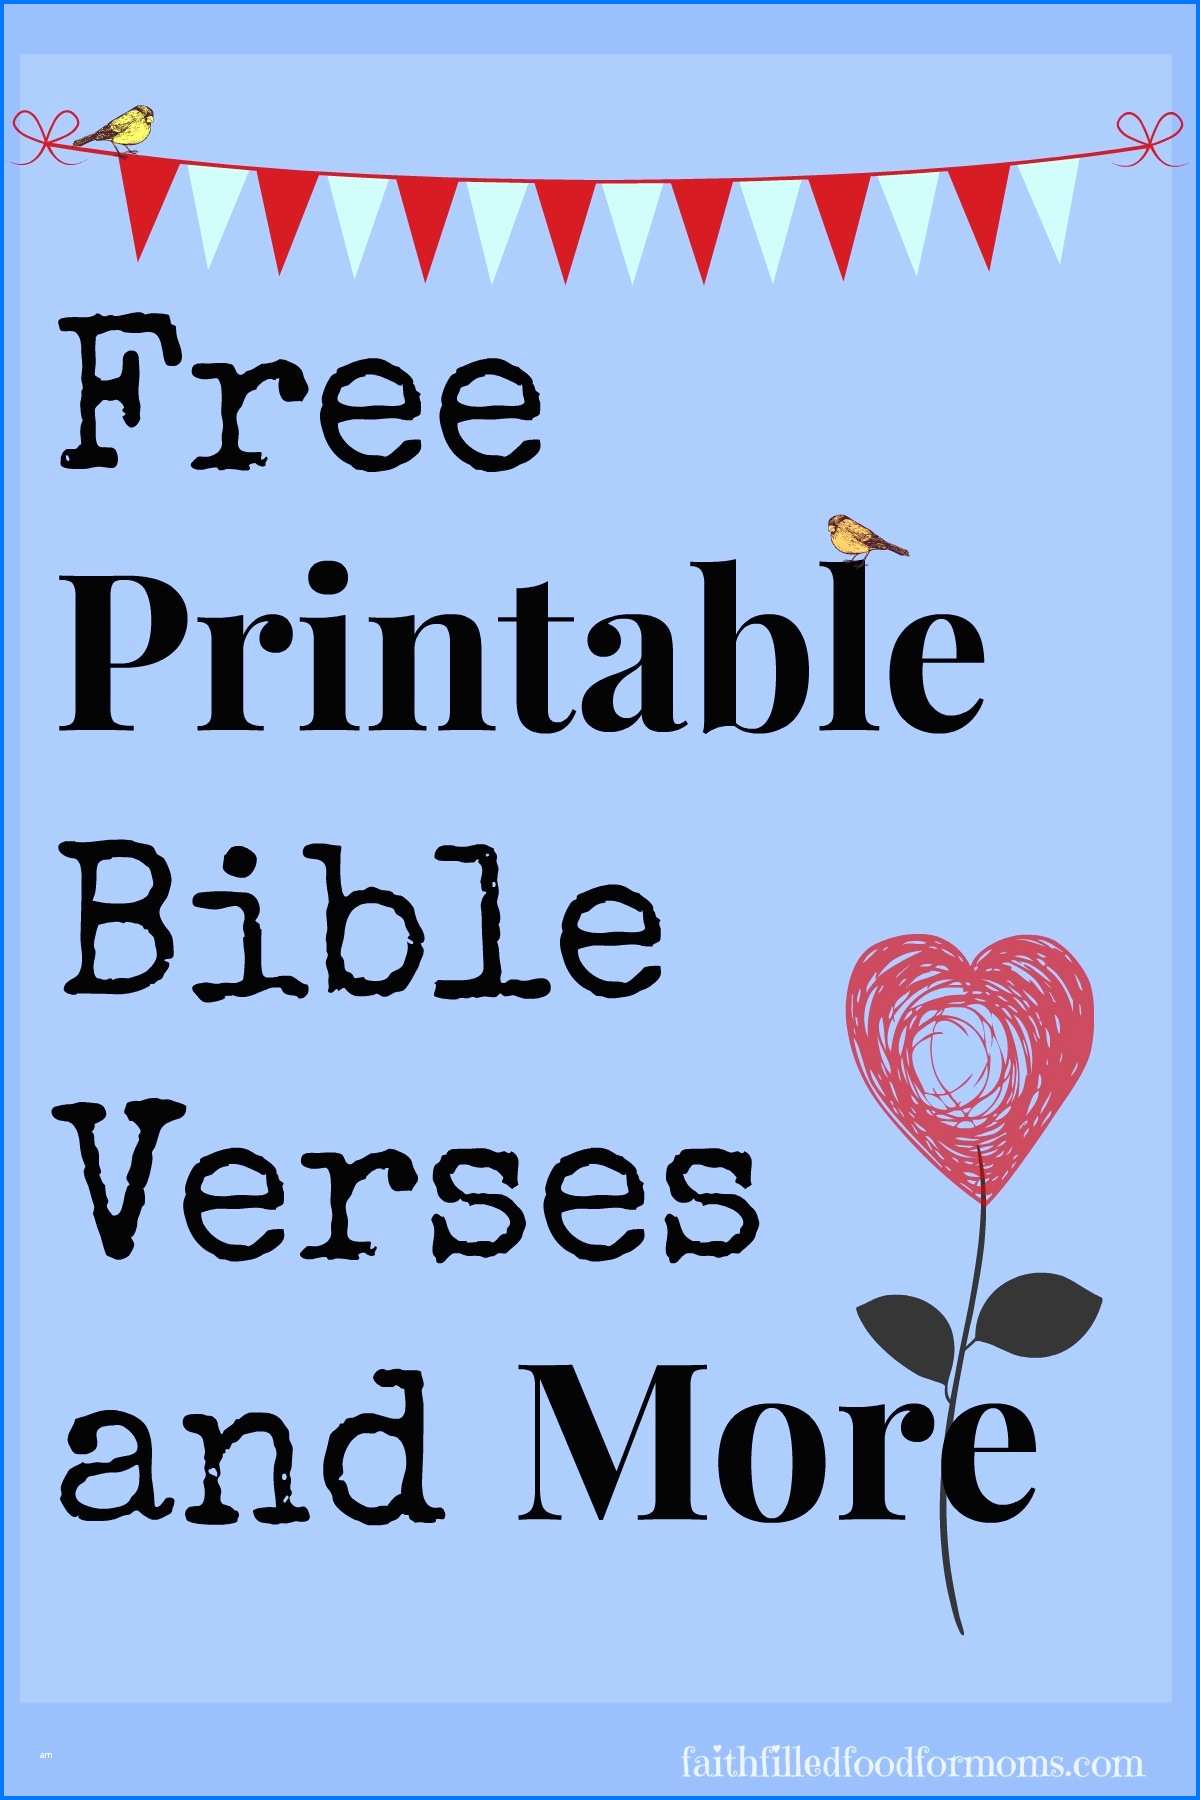 Inspirational Christian Cliparts Free Download Clip Art.